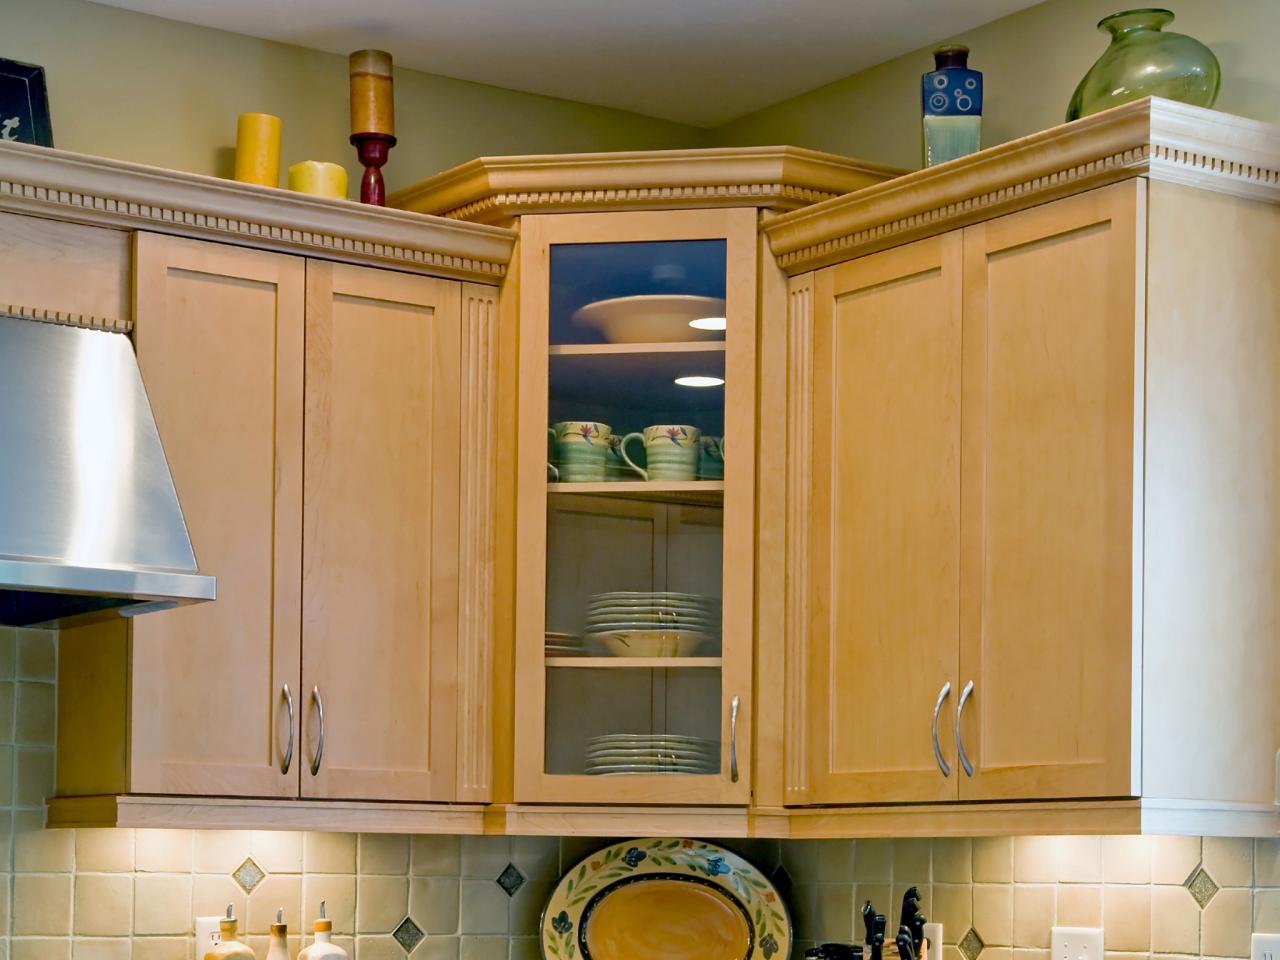 Corner Kitchen Cabinets Pictures, Ideas & Tips From HGTV   HGTV